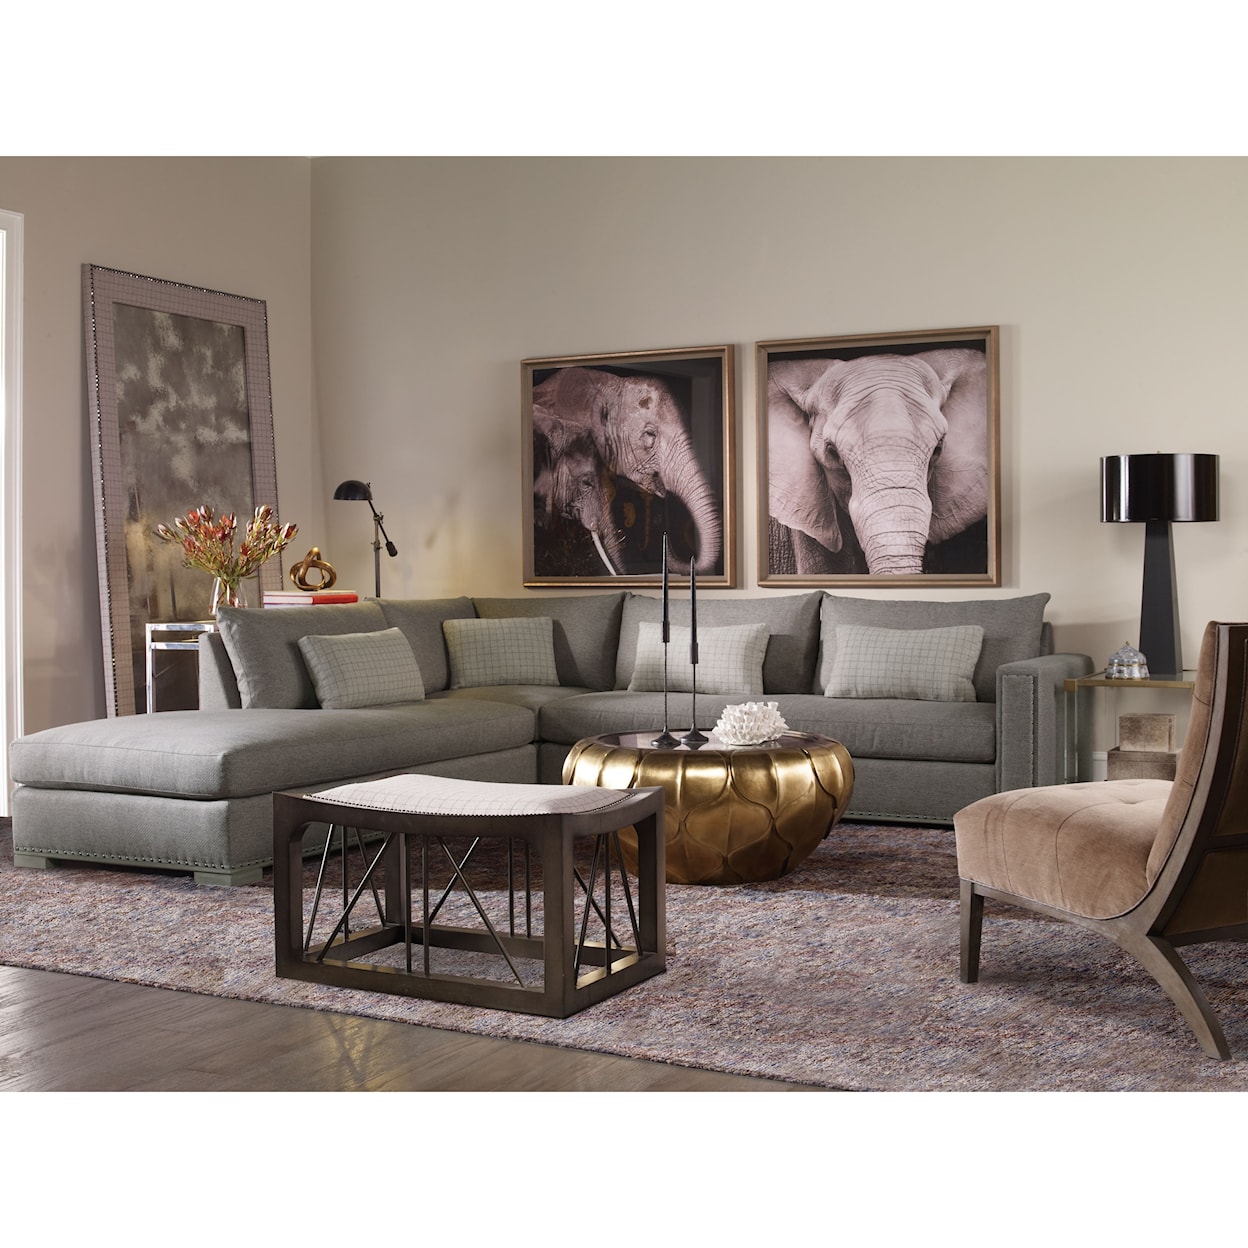 Vanguard Furniture New Field by Thom Filicia Home Side Table